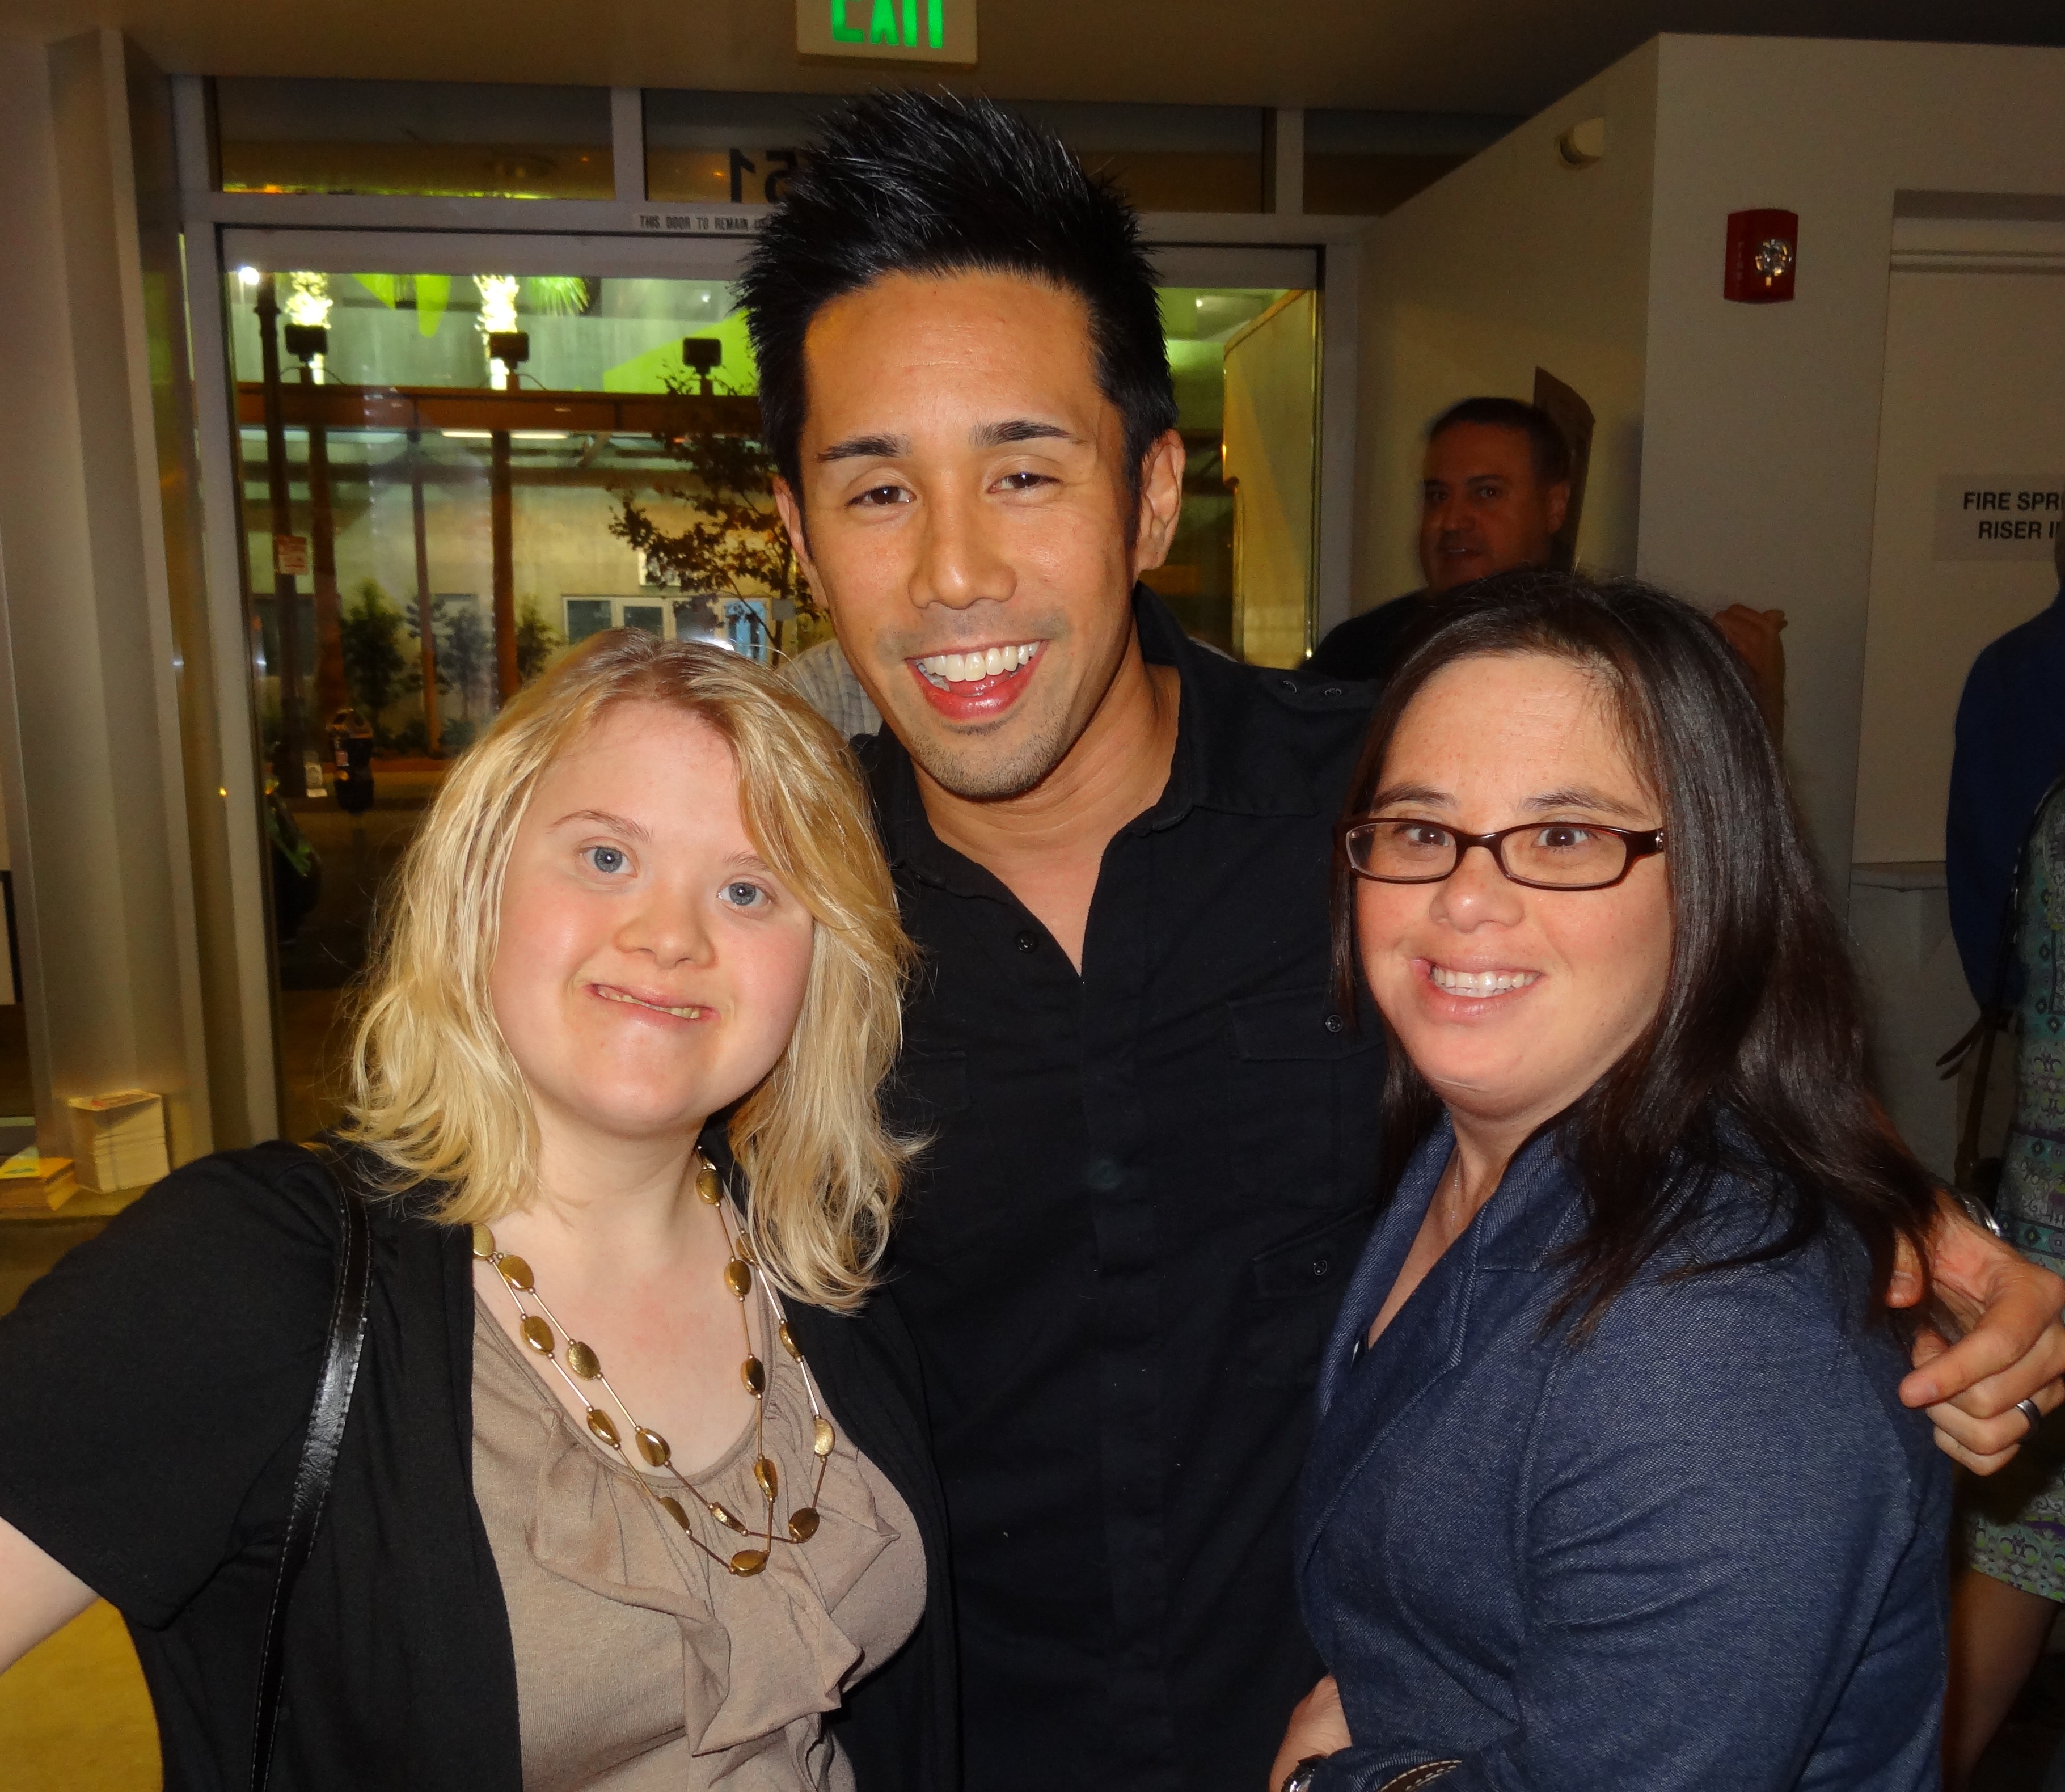 Jessica Morgan, Perry Shen, and Marcia Landeros at Unidentified premiere.